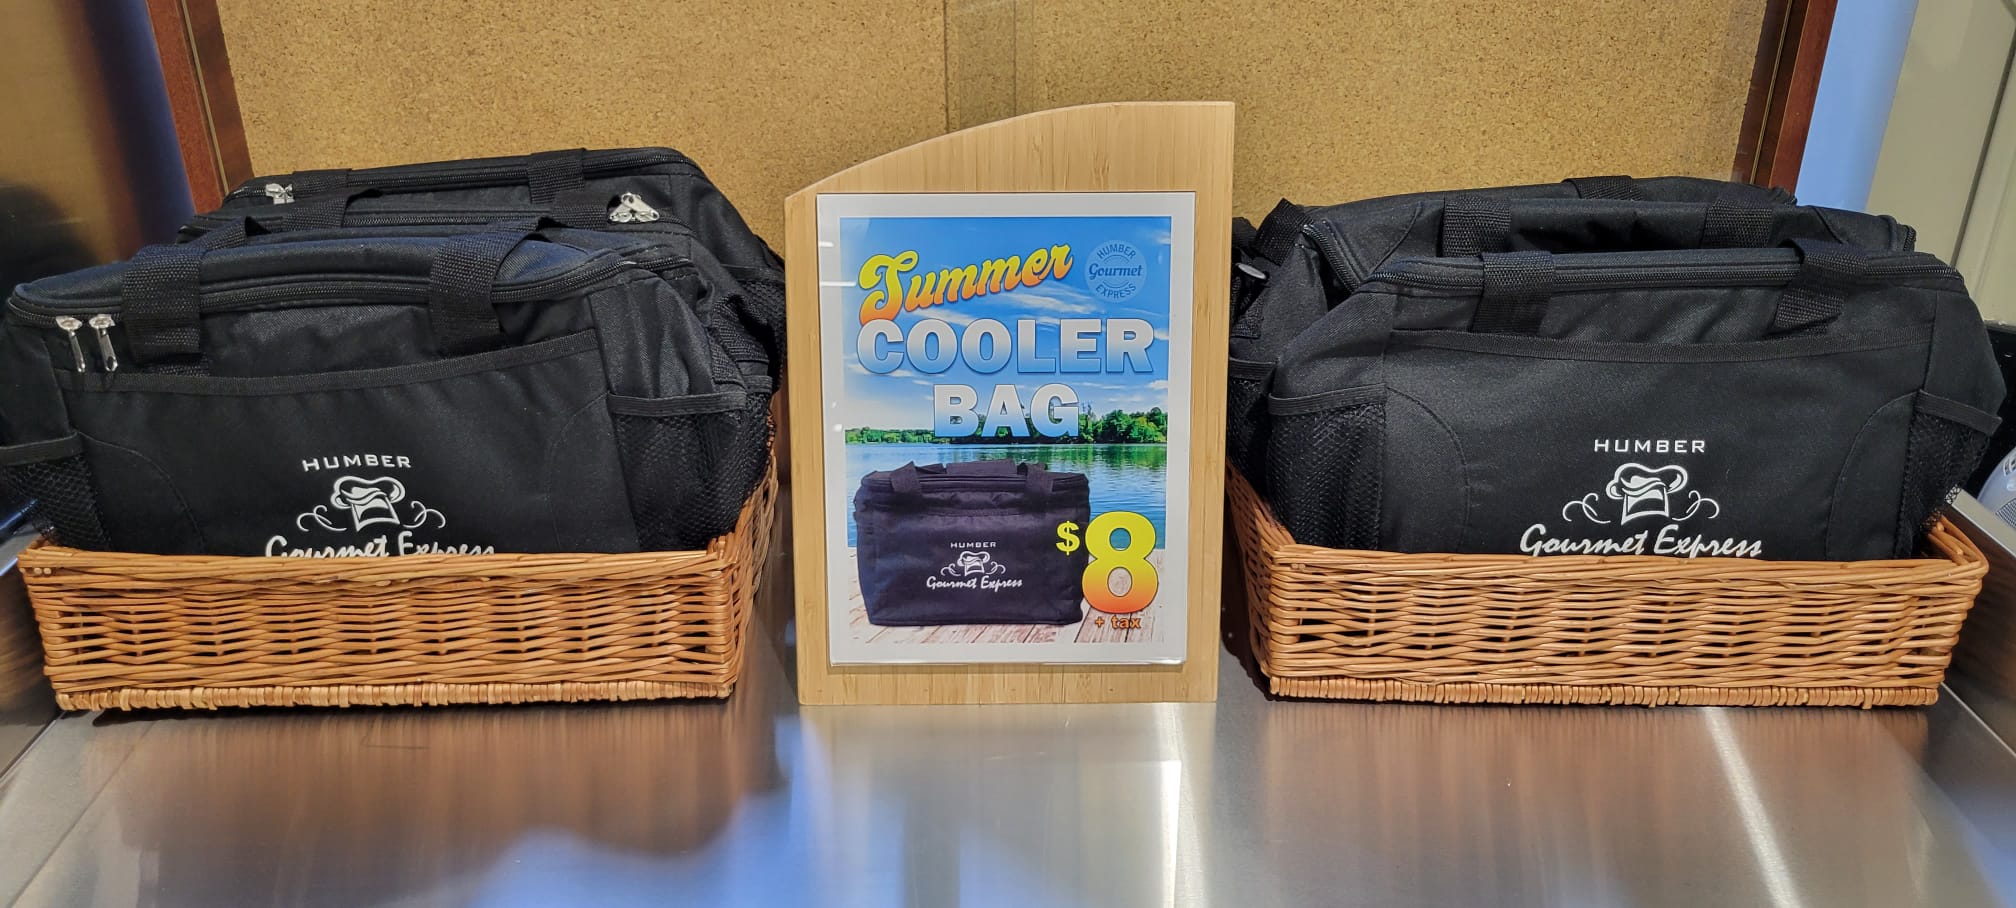 Picture of cooler bags